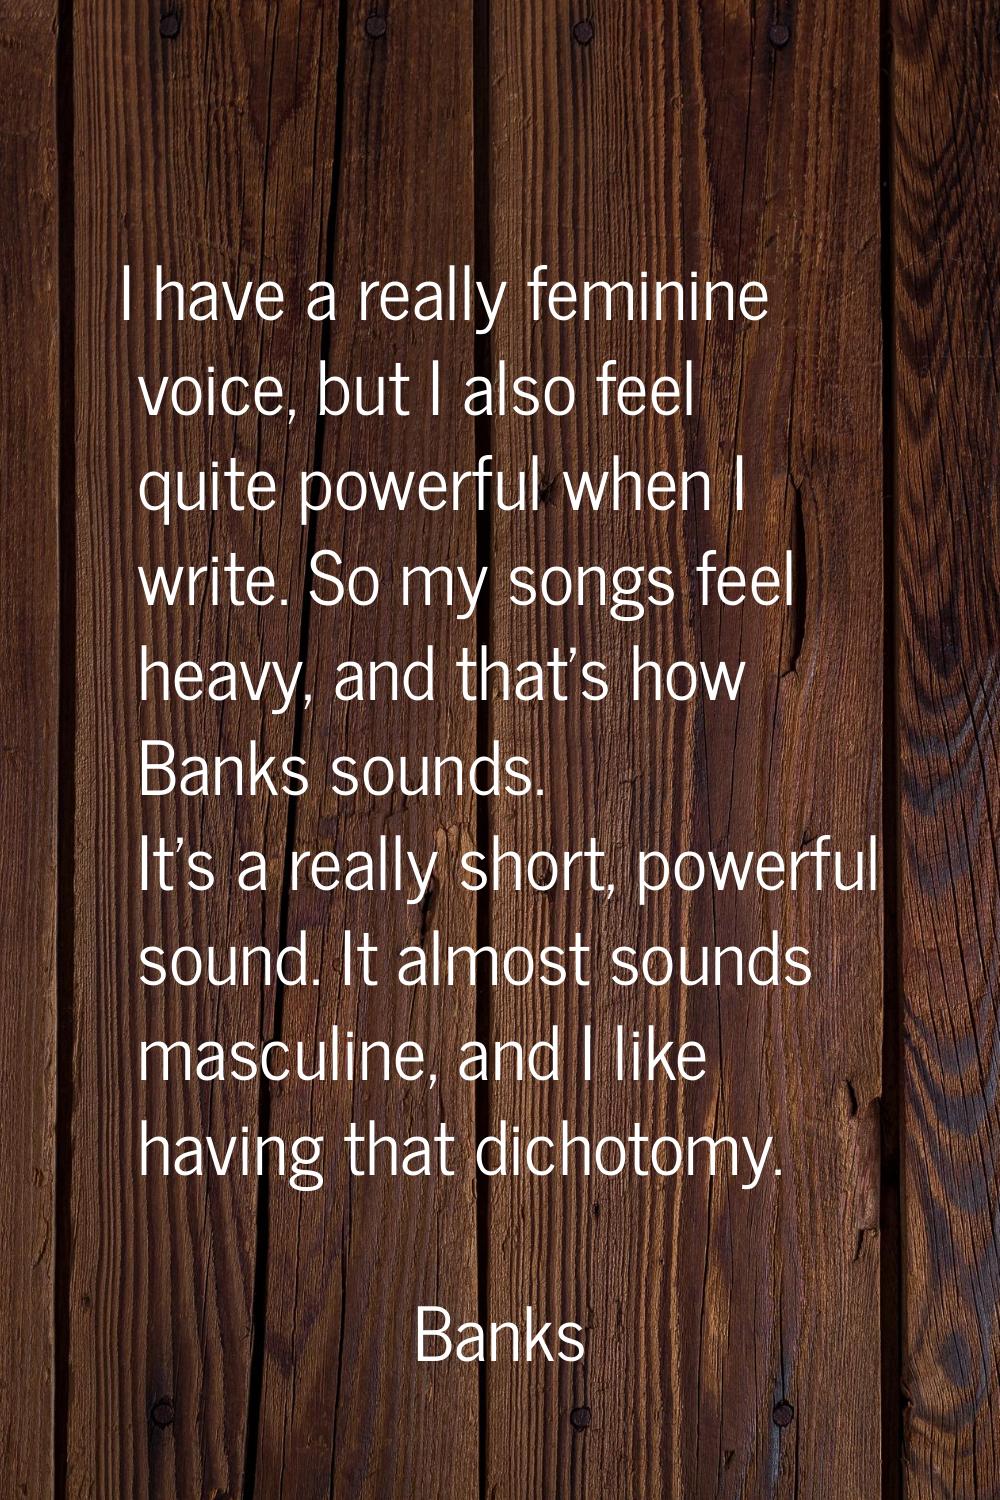 I have a really feminine voice, but I also feel quite powerful when I write. So my songs feel heavy